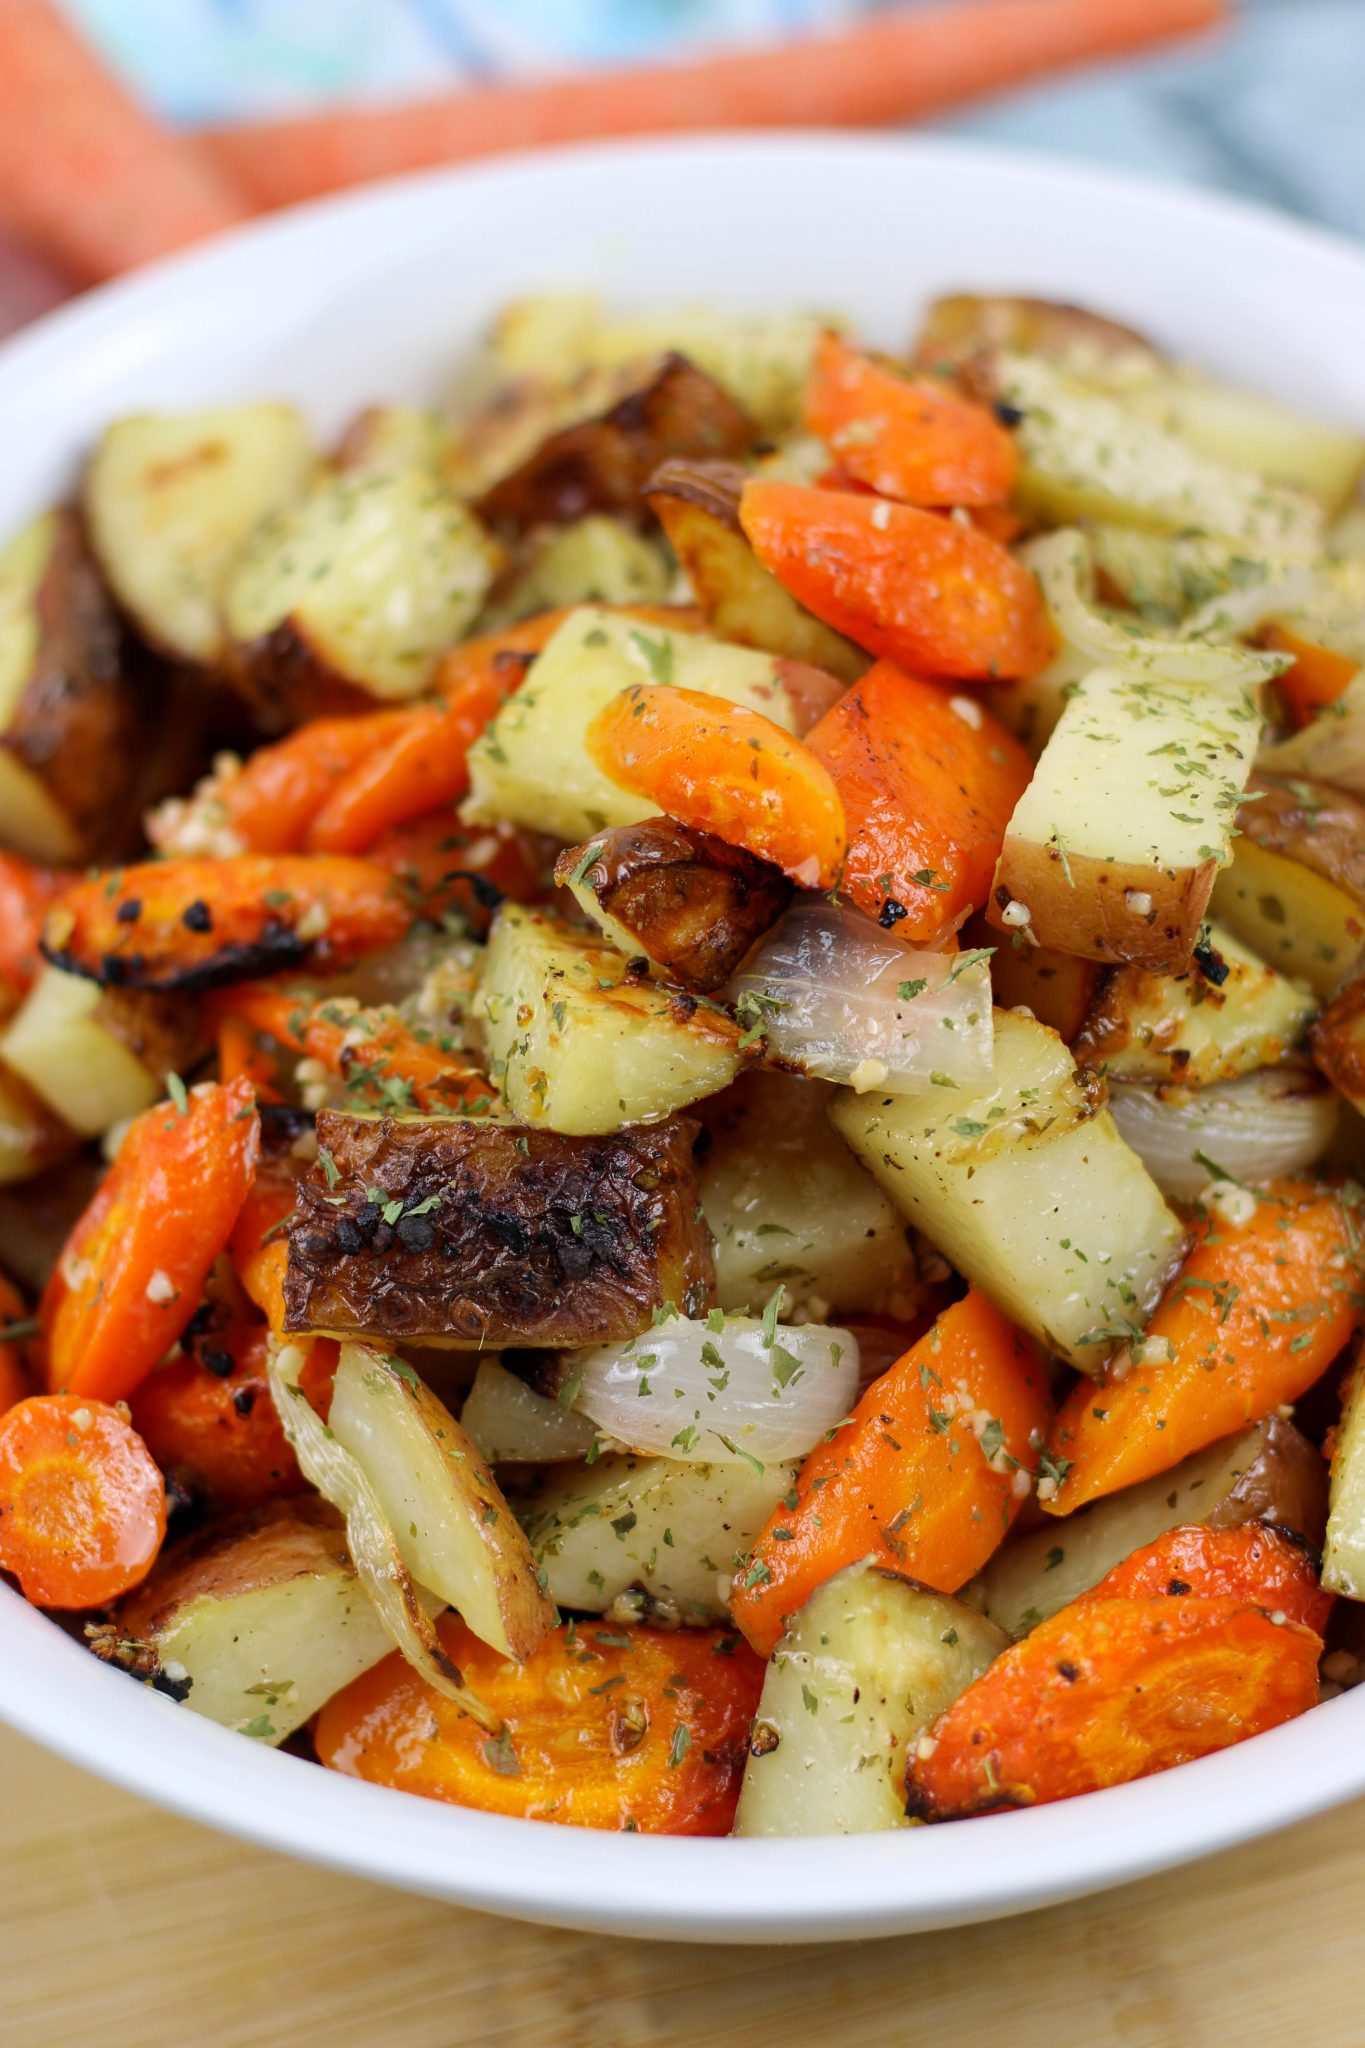 Roasted Potatoes with Onions and Carrots